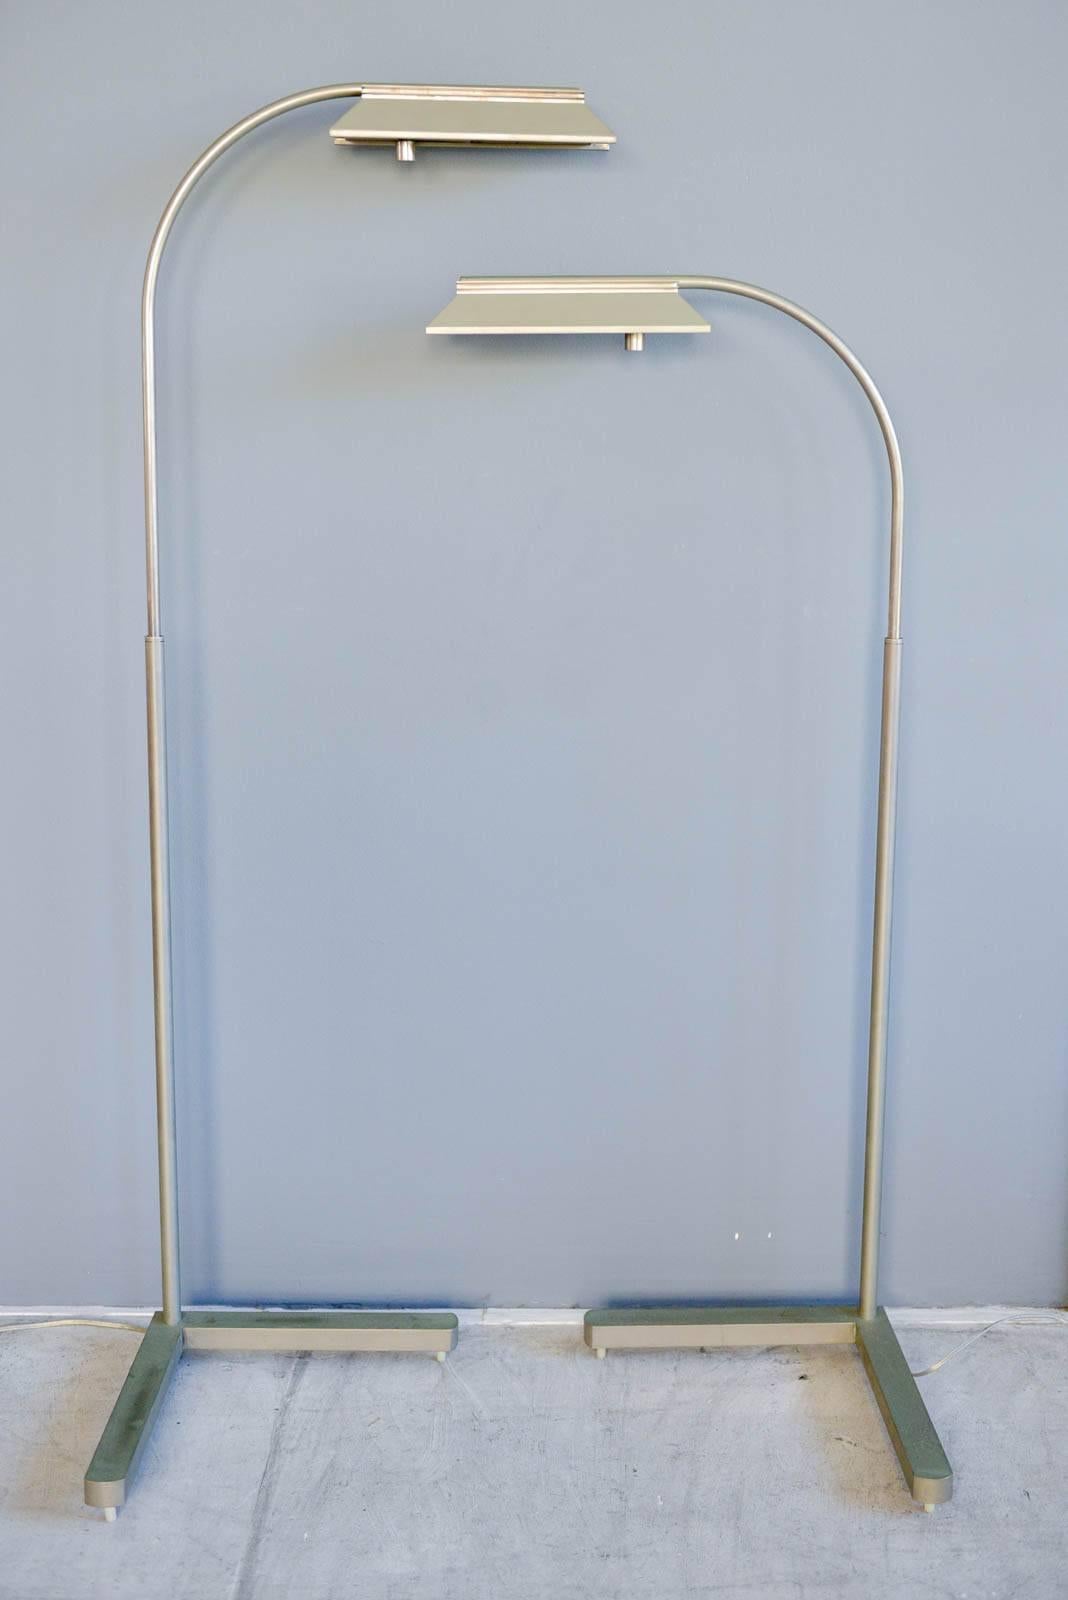 Pair of brushed nickel adjustable dimmable floor lamps by Casella, circa 1970. Good vintage condition, with original patina. Updated with new wiring. Dimmable and adjustable swing arm with heavy steel base. Perfect reading lamps next to chairs or